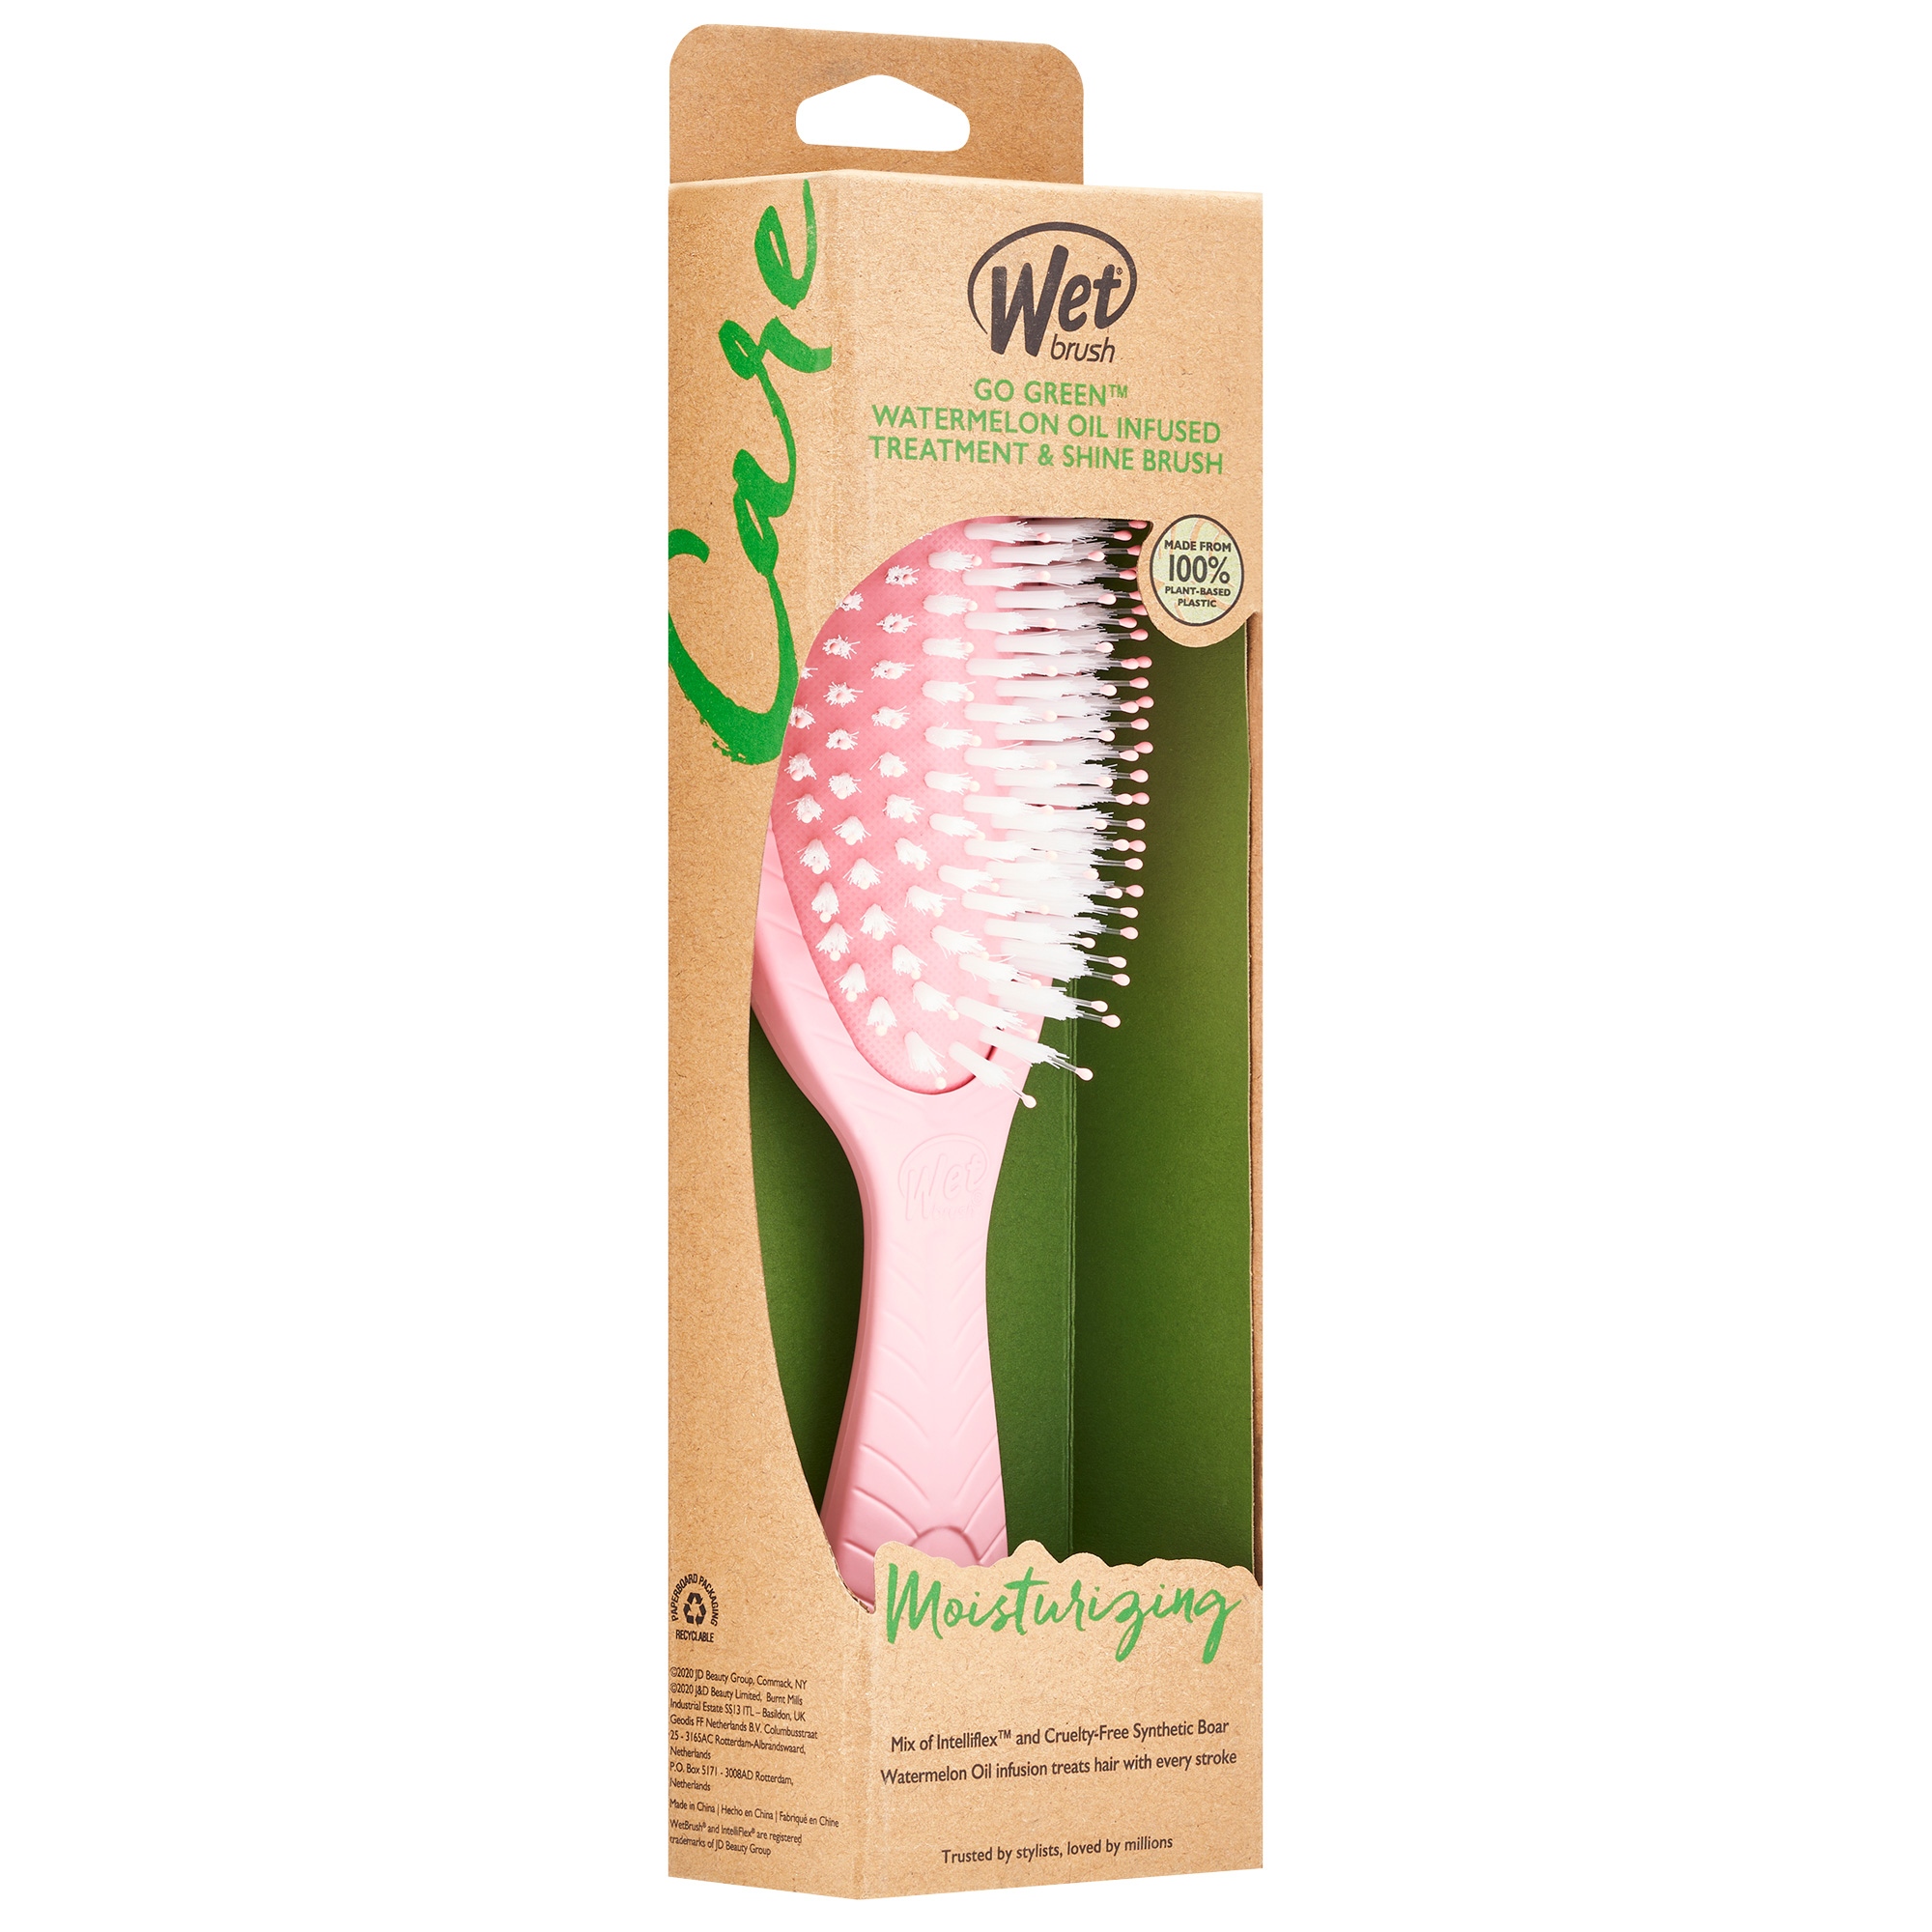 Wet Brush Go Green Treatment & Shine -  Infused for Impurities - Watermelon Oil